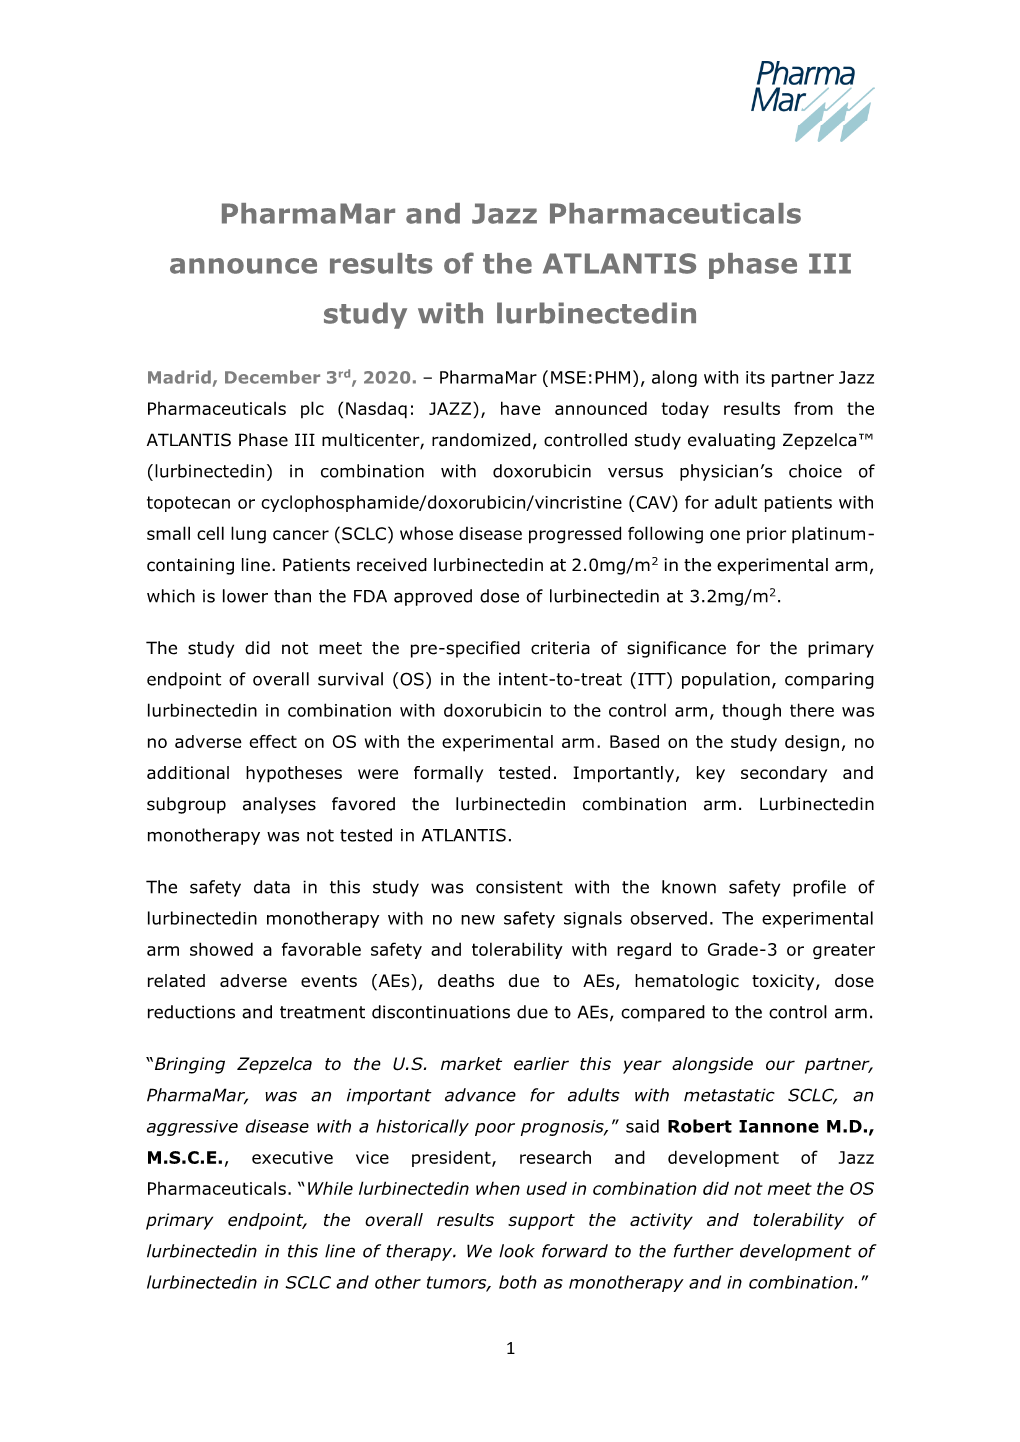 Pharmamar and Jazz Pharmaceuticals Announce Results of the ATLANTIS Phase III Study with Lurbinectedin